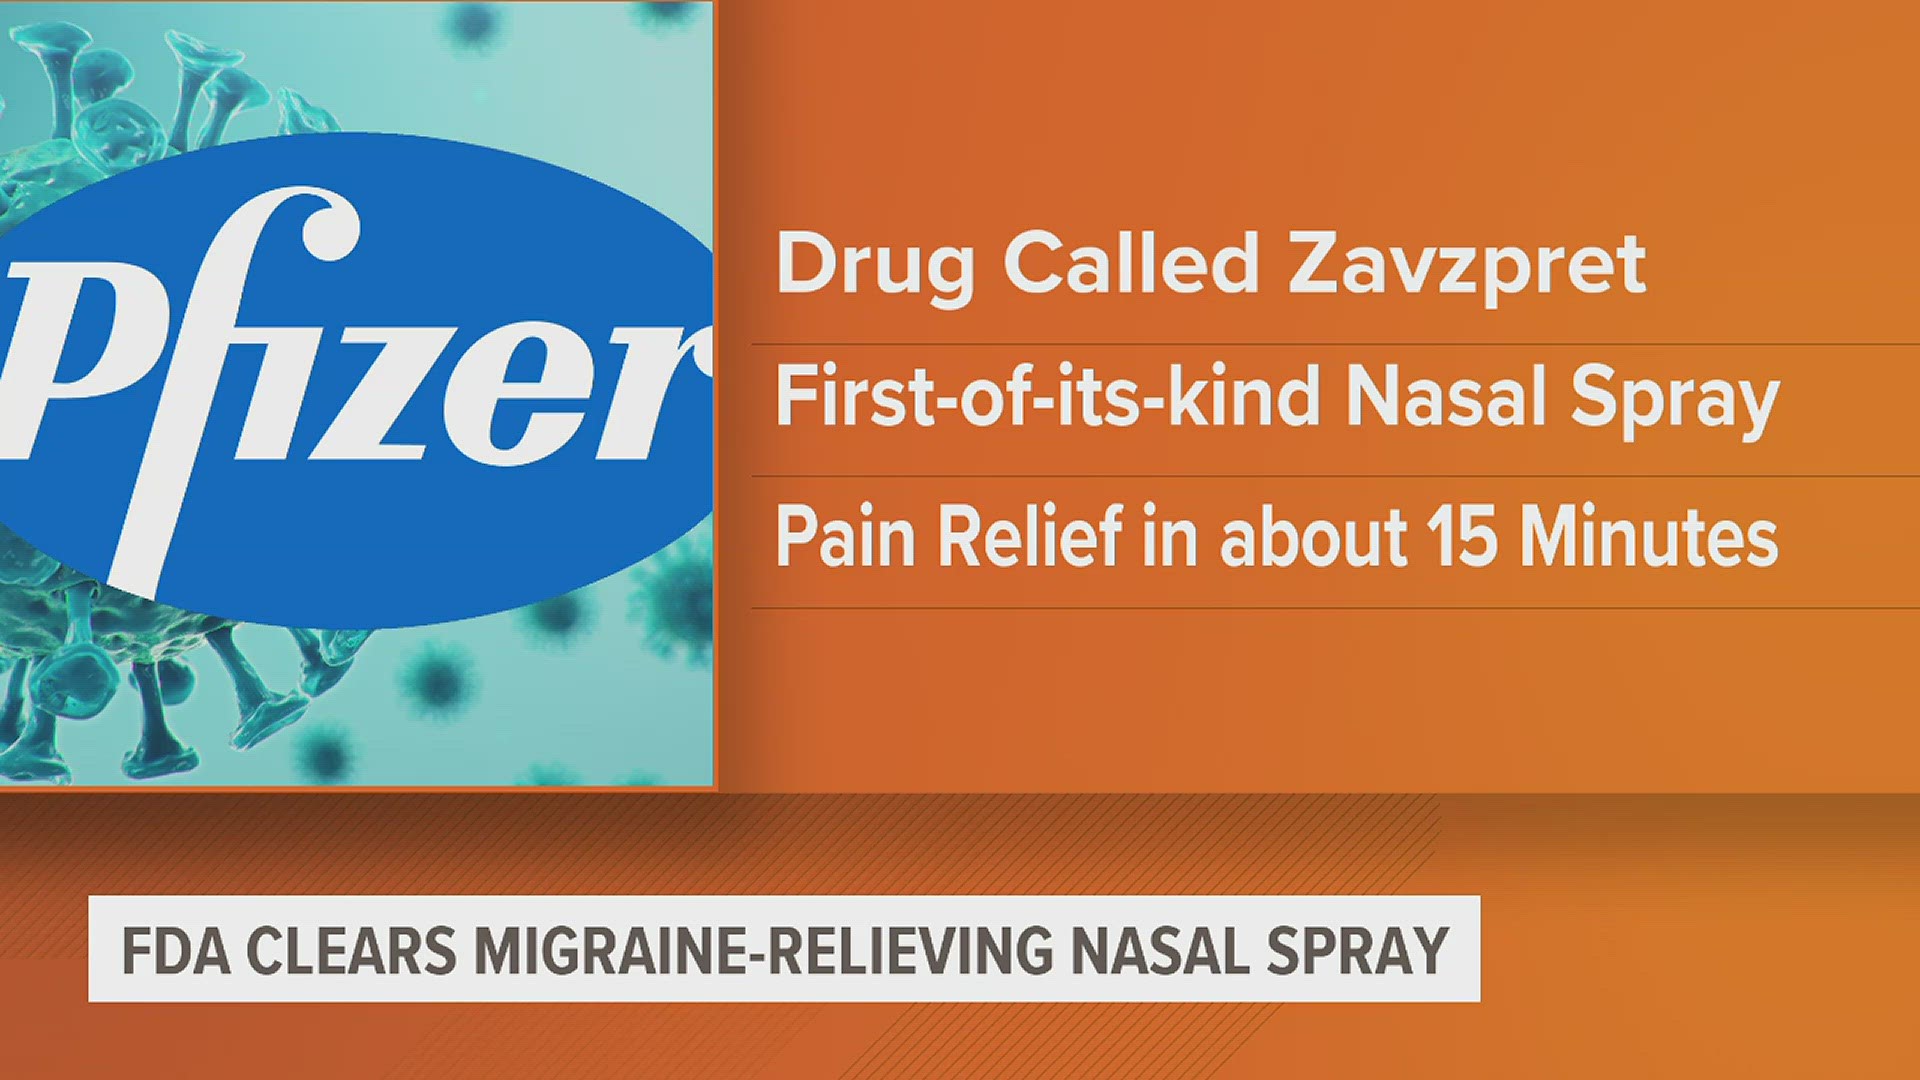 In clinical trials, Pfizer said the drug provided pain relief in as little as 15 minutes.